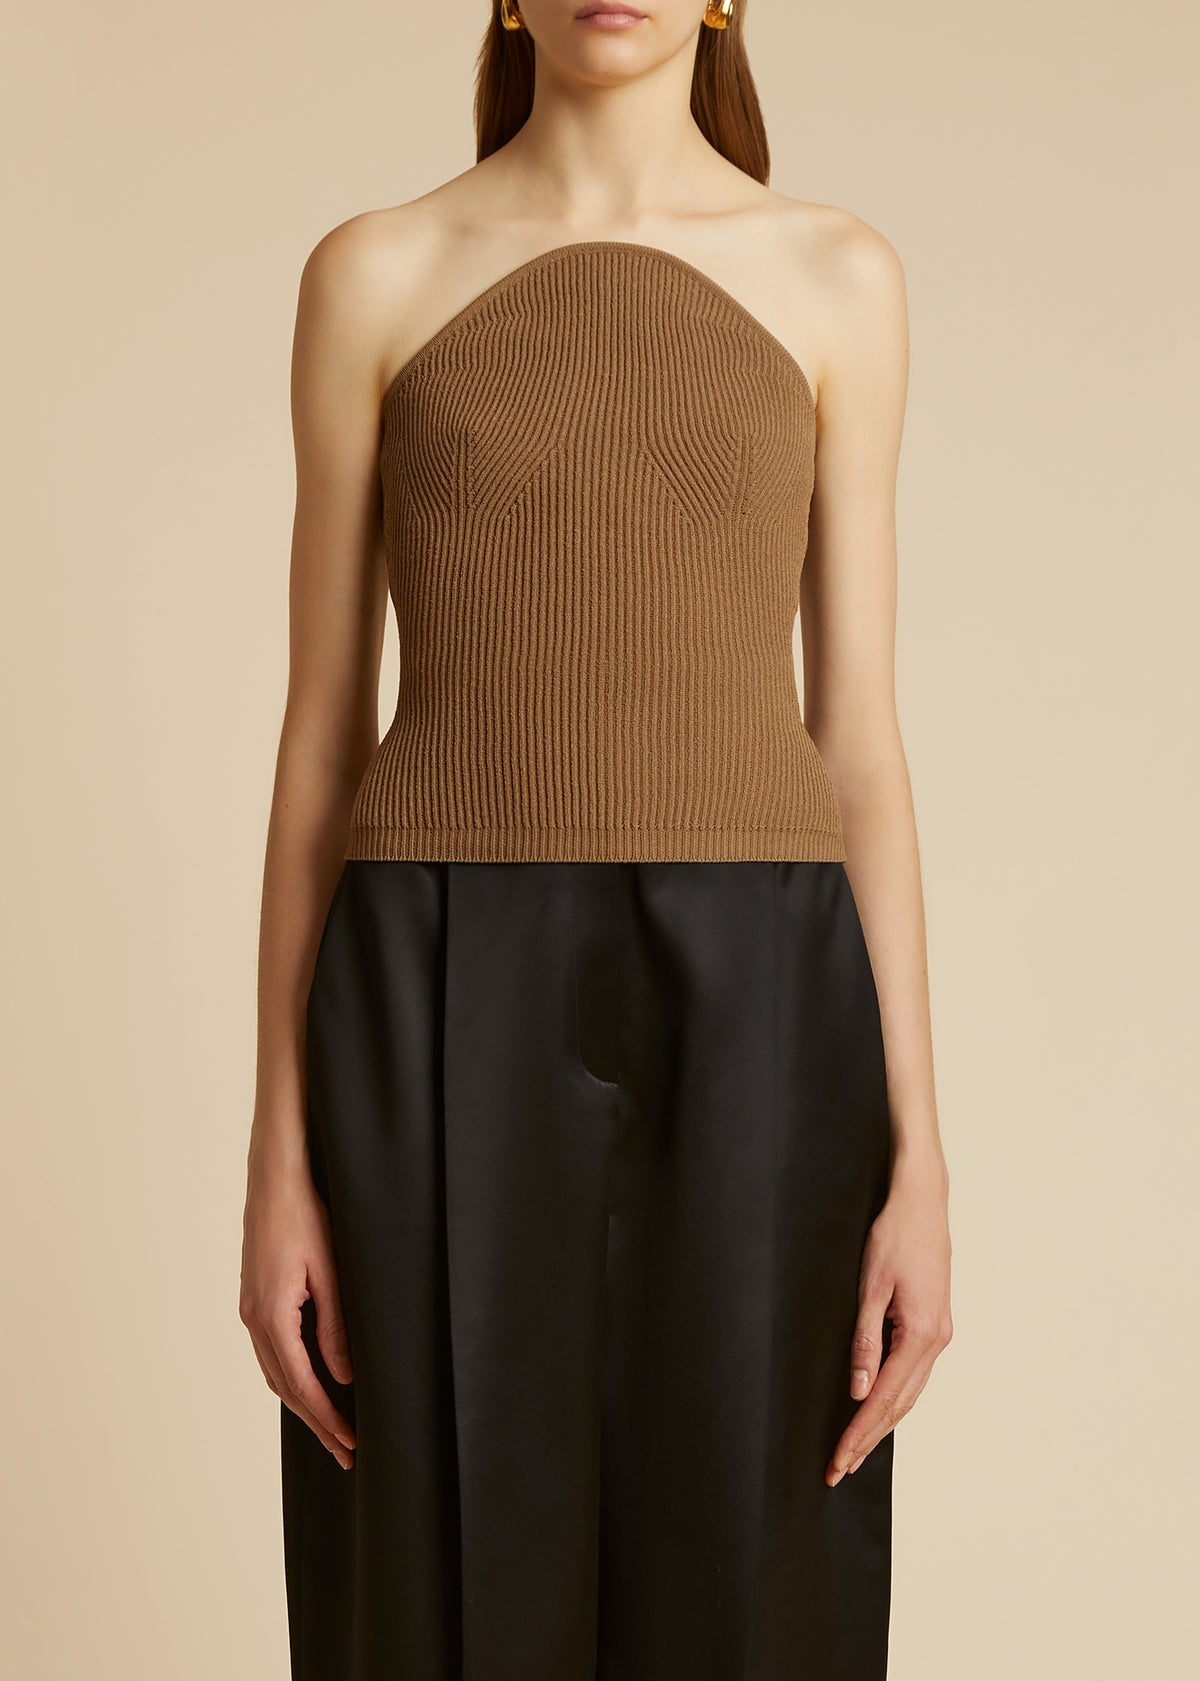 The Jericho Top in Carob - 2